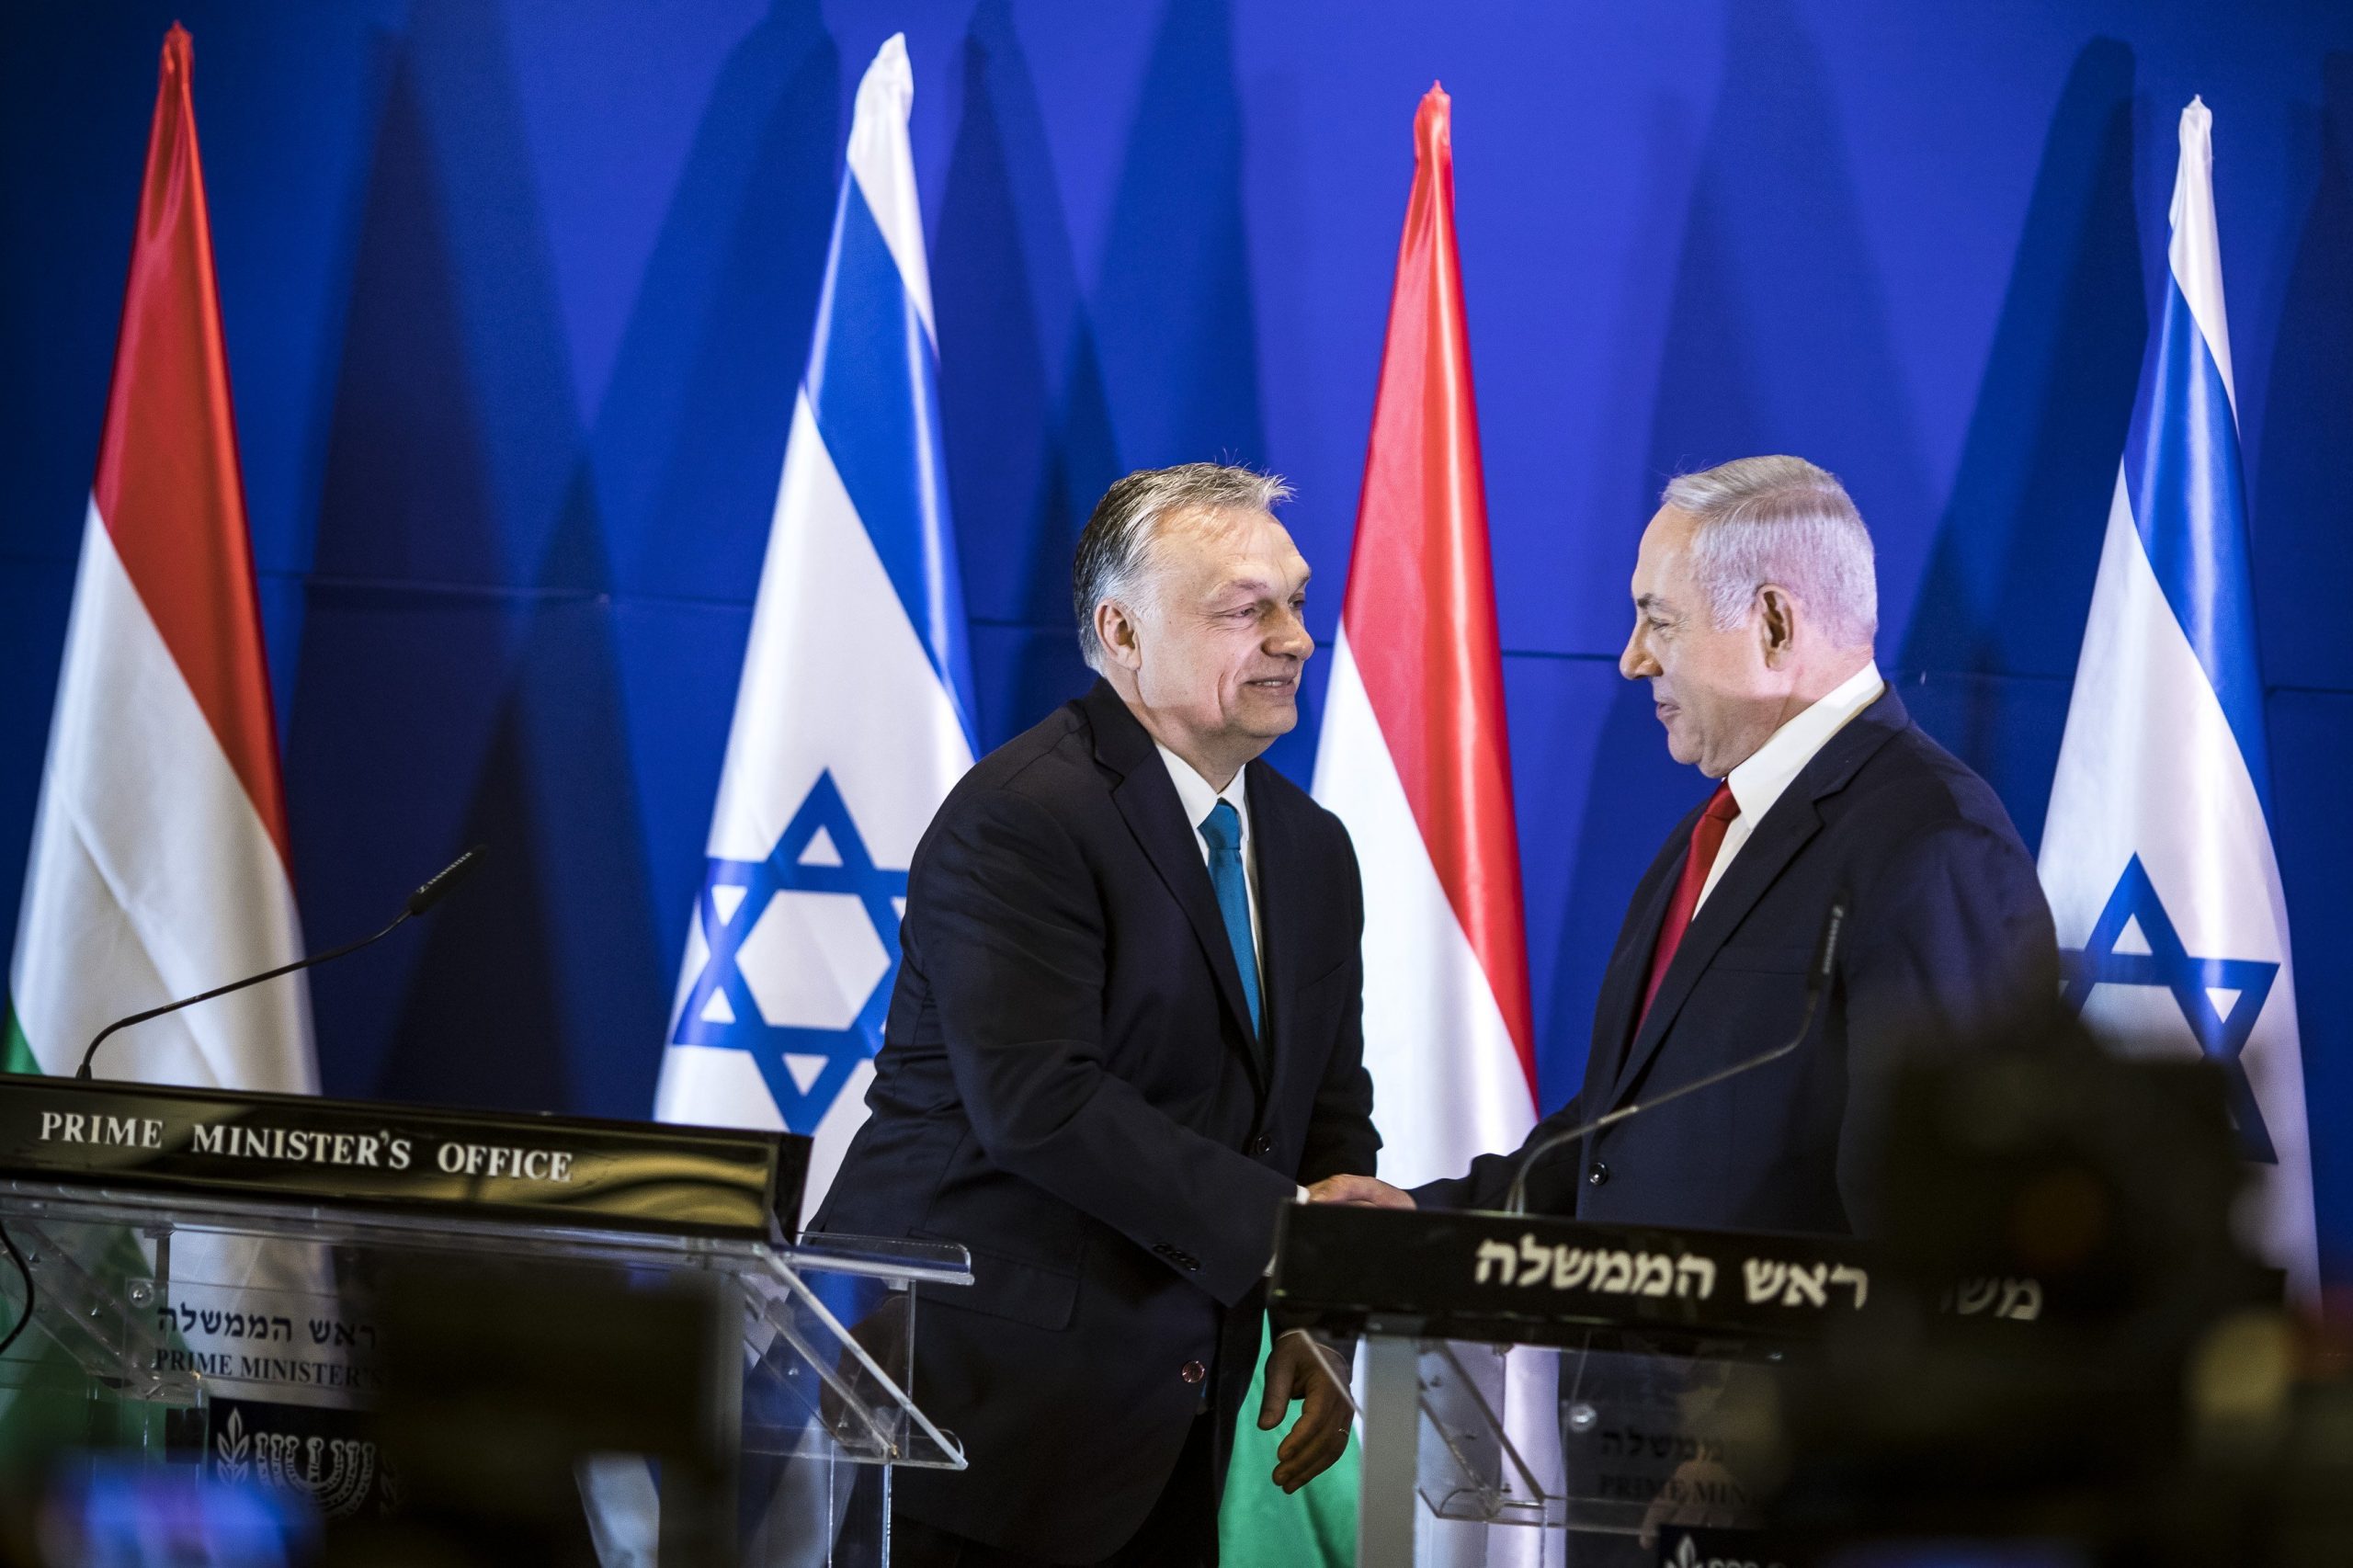 Hungary's Government Roots for Netanyahu's Return in Israel